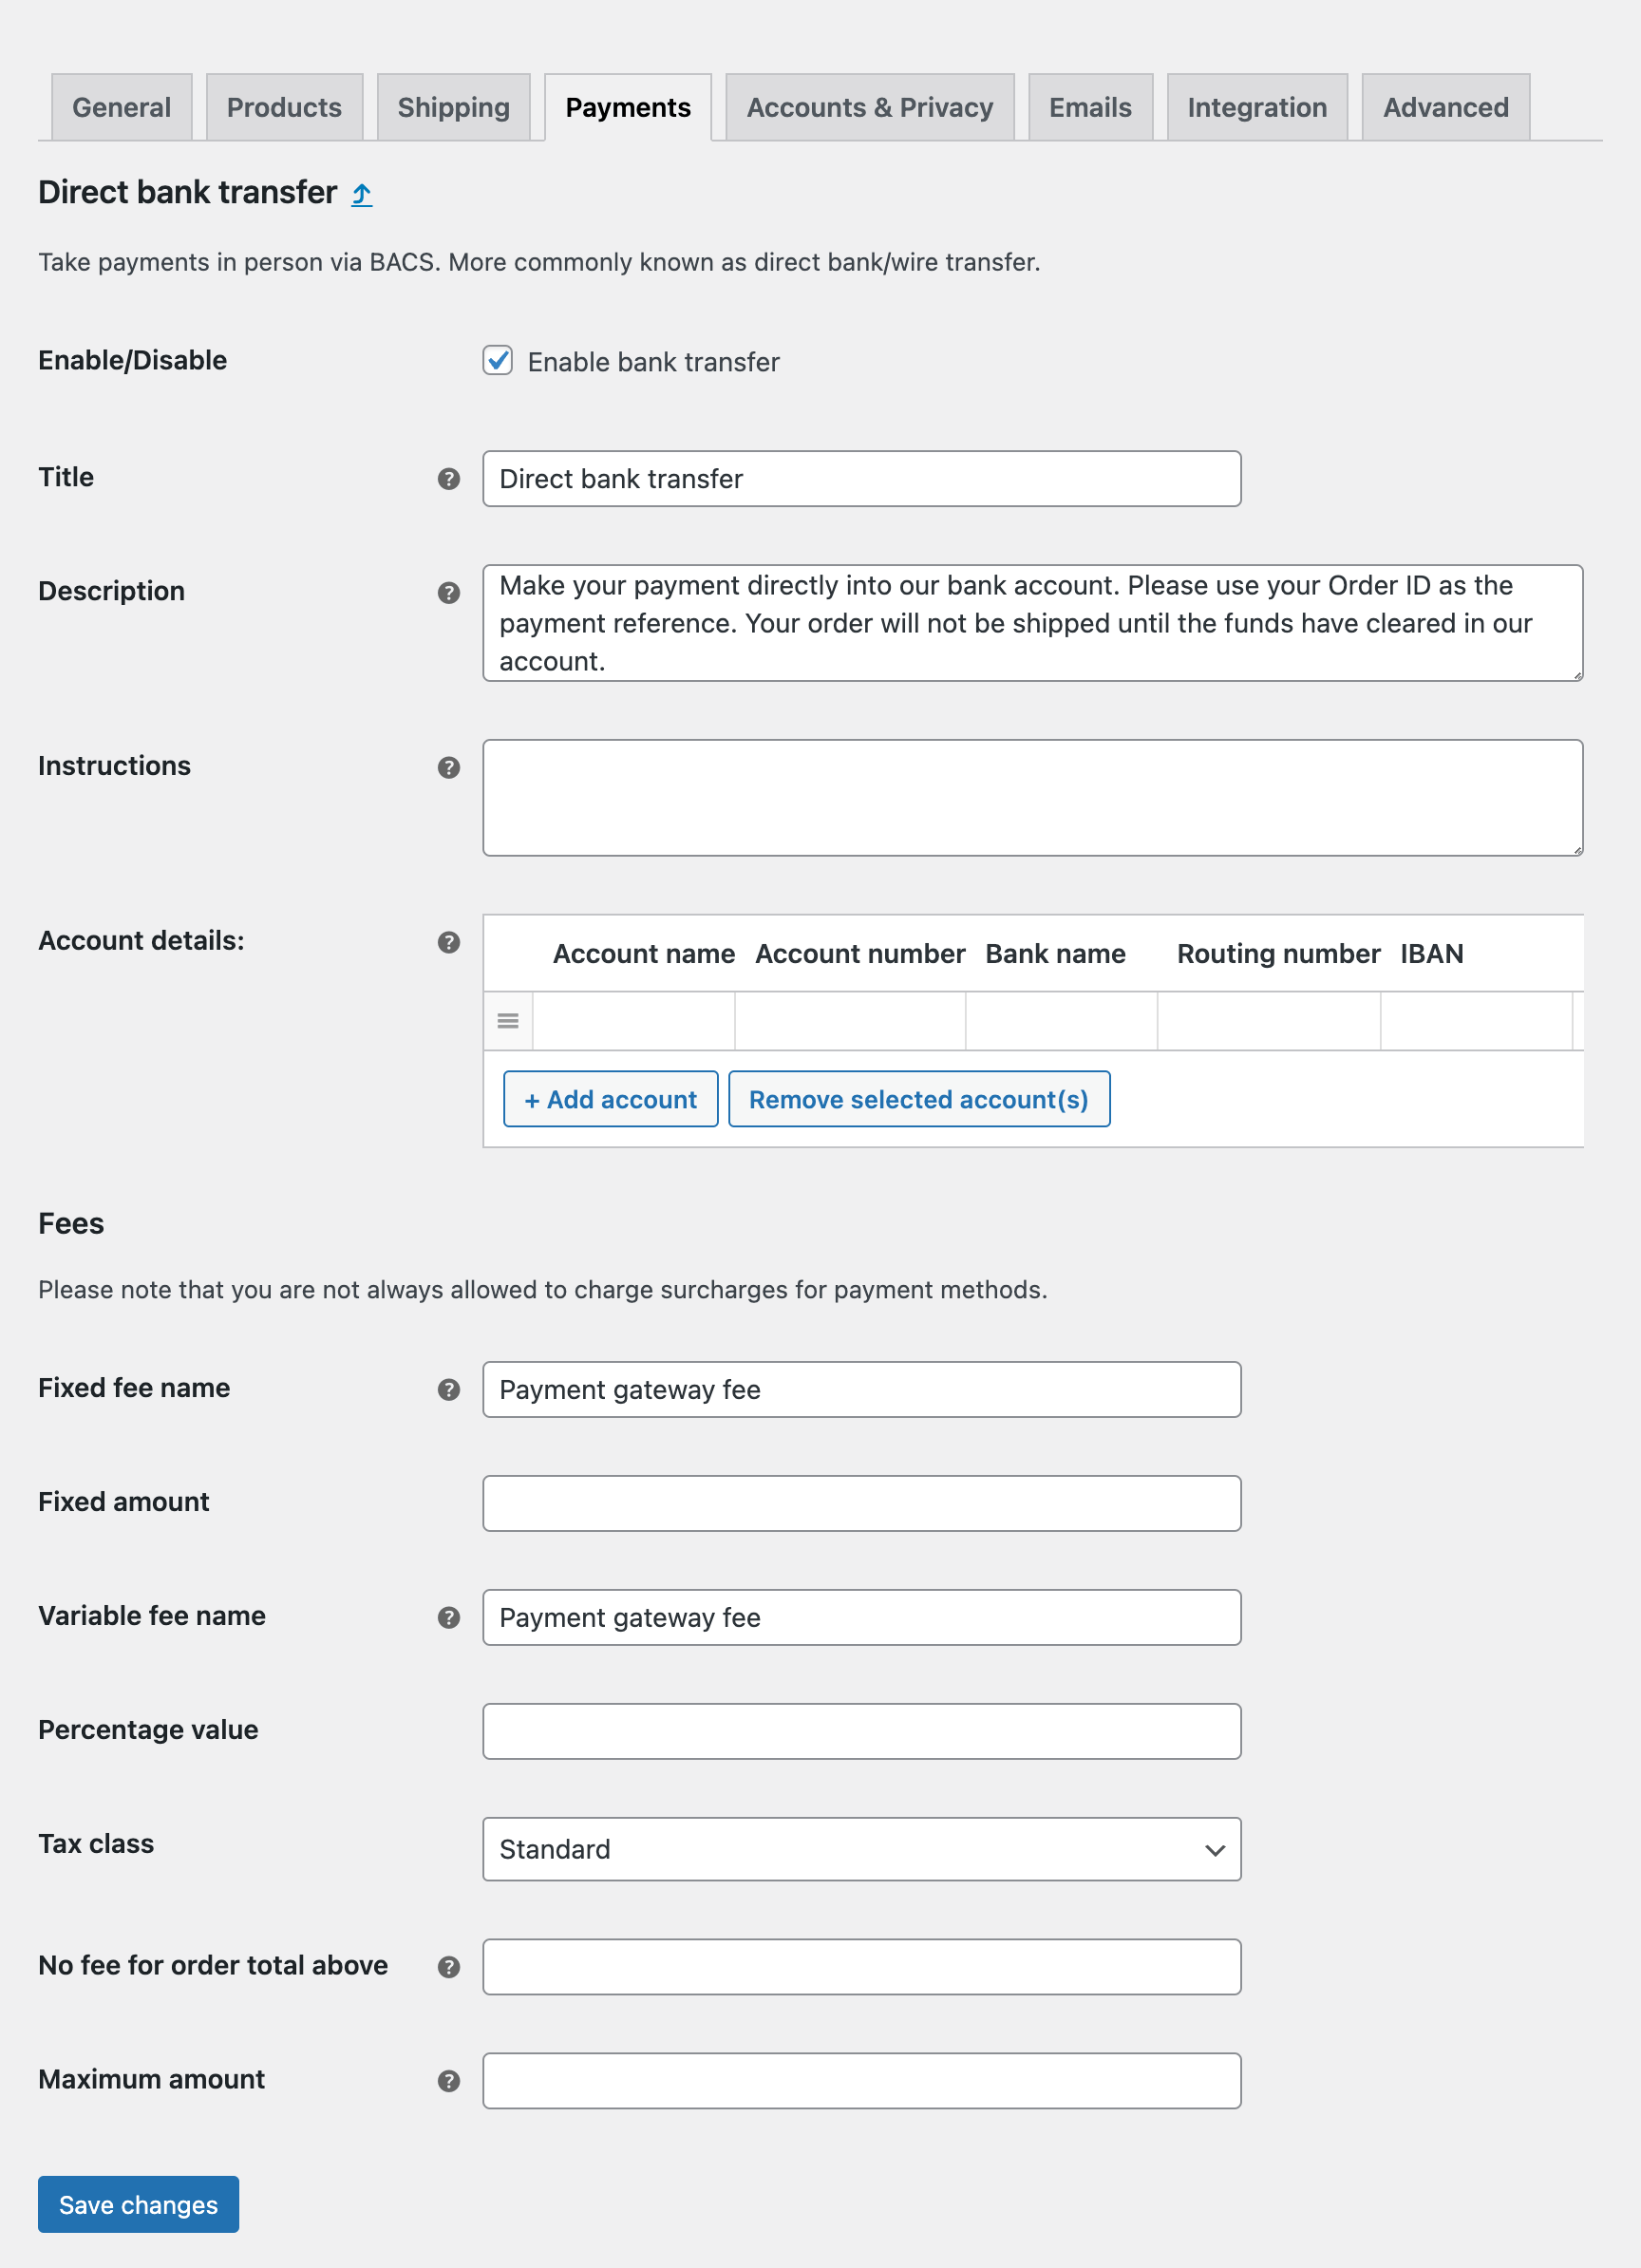 Screenshot of the WooCommerce direct bank transfer payment method settings page in the WordPress admin dashboard with the extra fees settings.